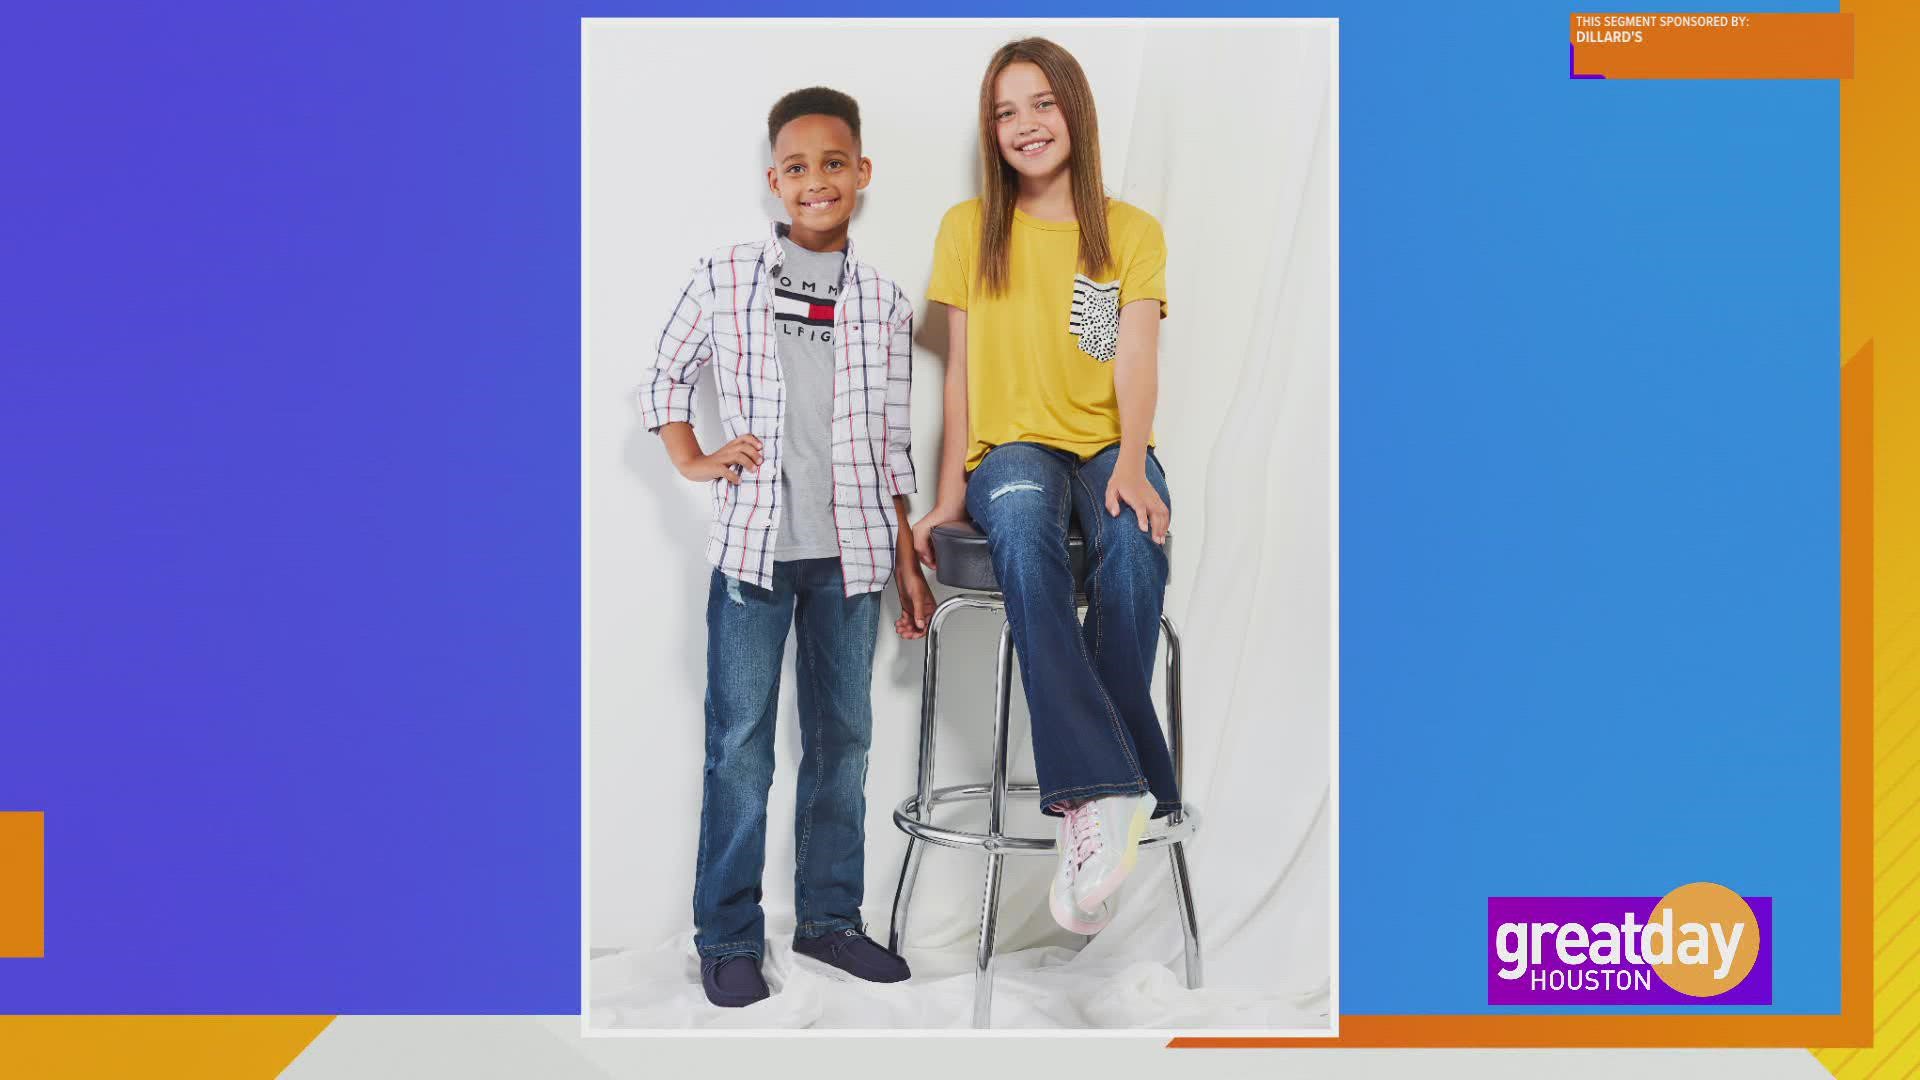 Celebrate "Kids Day" at Dillard's and save money on the latest back-to-school looks.